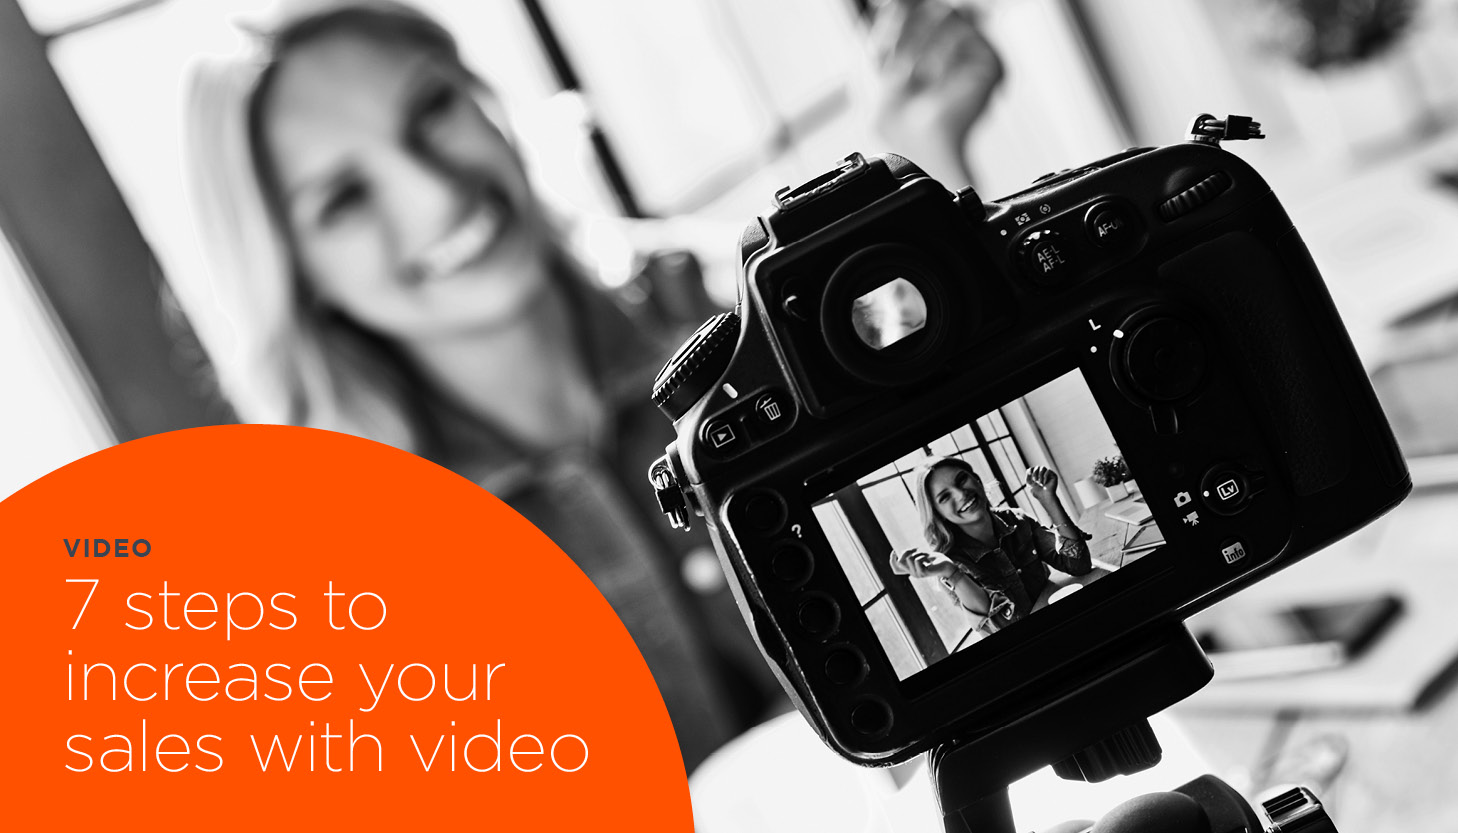 7 steps to increase your sales with video